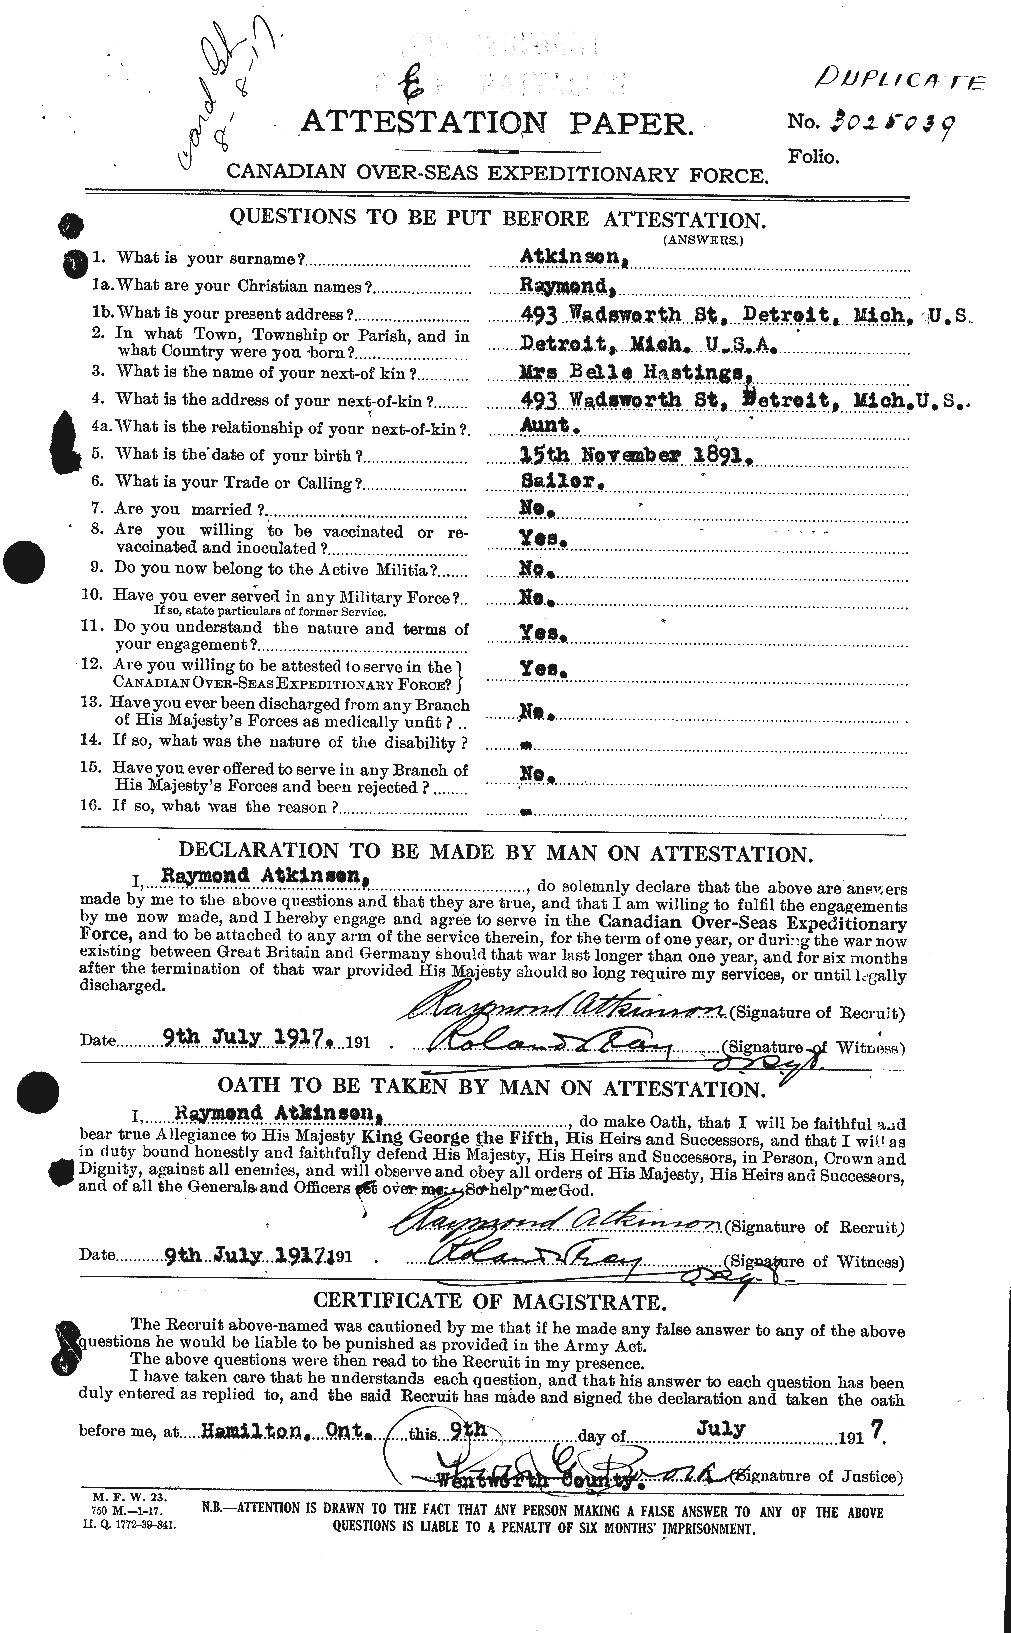 Personnel Records of the First World War - CEF 217251a